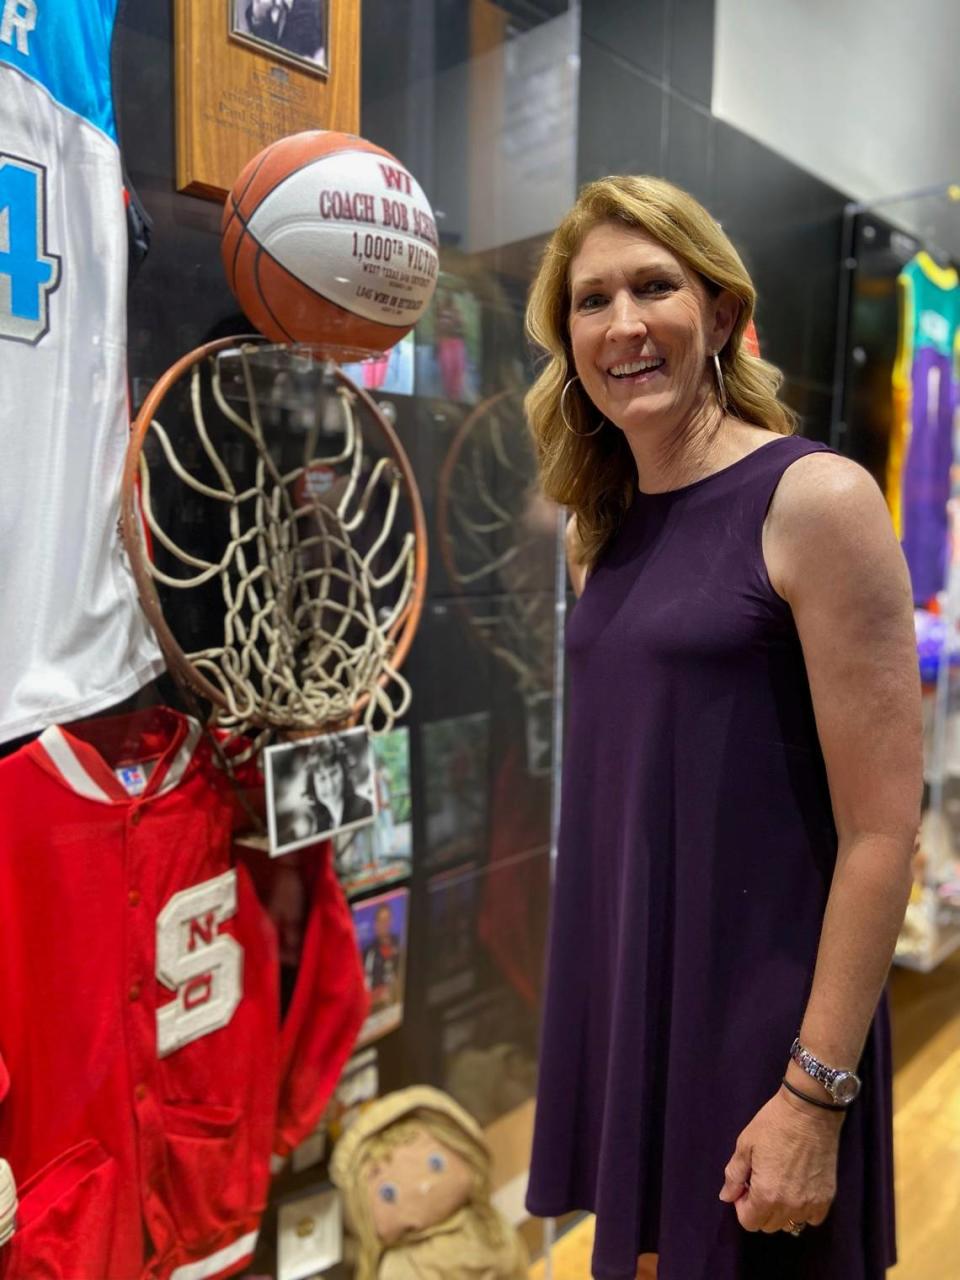 Debbie Antonelli, a 2022 inductee into the Women’s Basketball Hall of Fame as a contributor poses next to the hoop she used growing up, Saturday, June 11, 2022 in Knoxville, Tenn. Debbie Antonelli, Becky Hammon, Doug Bruno and Penny Taylor are among the 2022 inductees into the Women’s Basketball Hall of Fame.